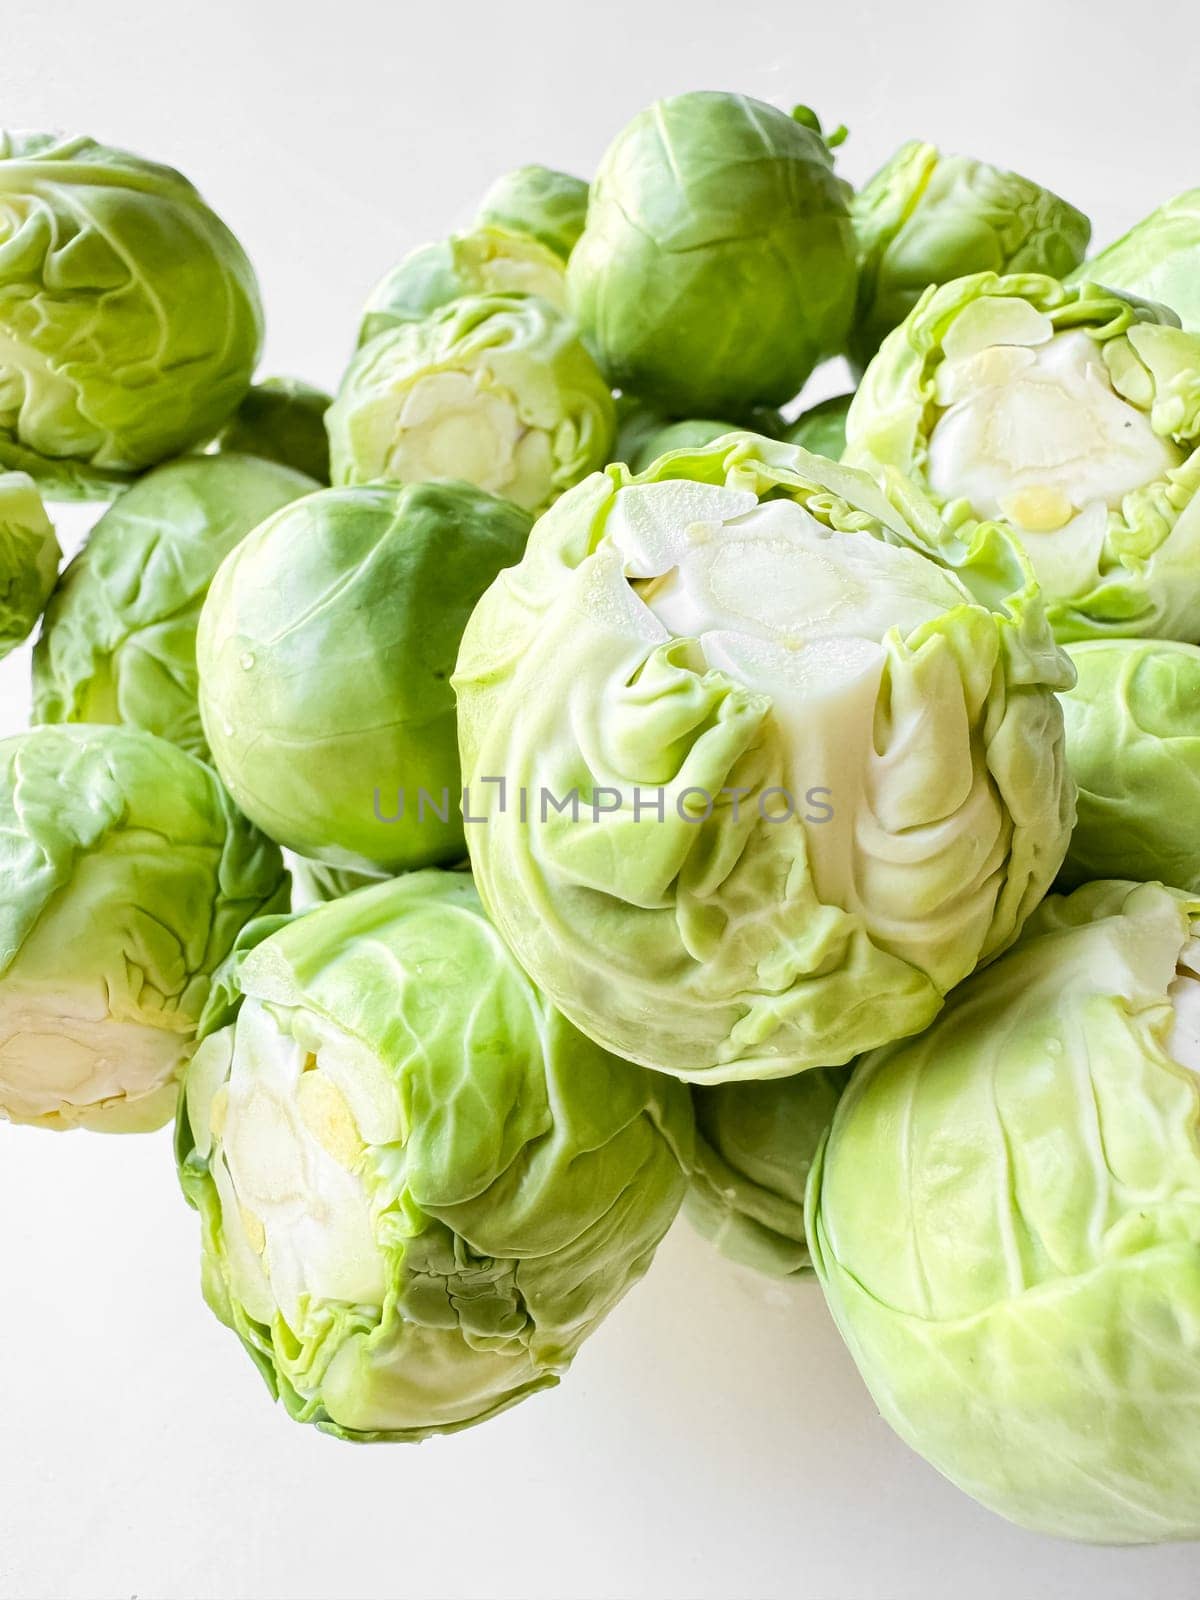 Close up of fresh green Brussels sprouts on white background. Organic vegetable, healthy food, vegan diet concept. High quality photo